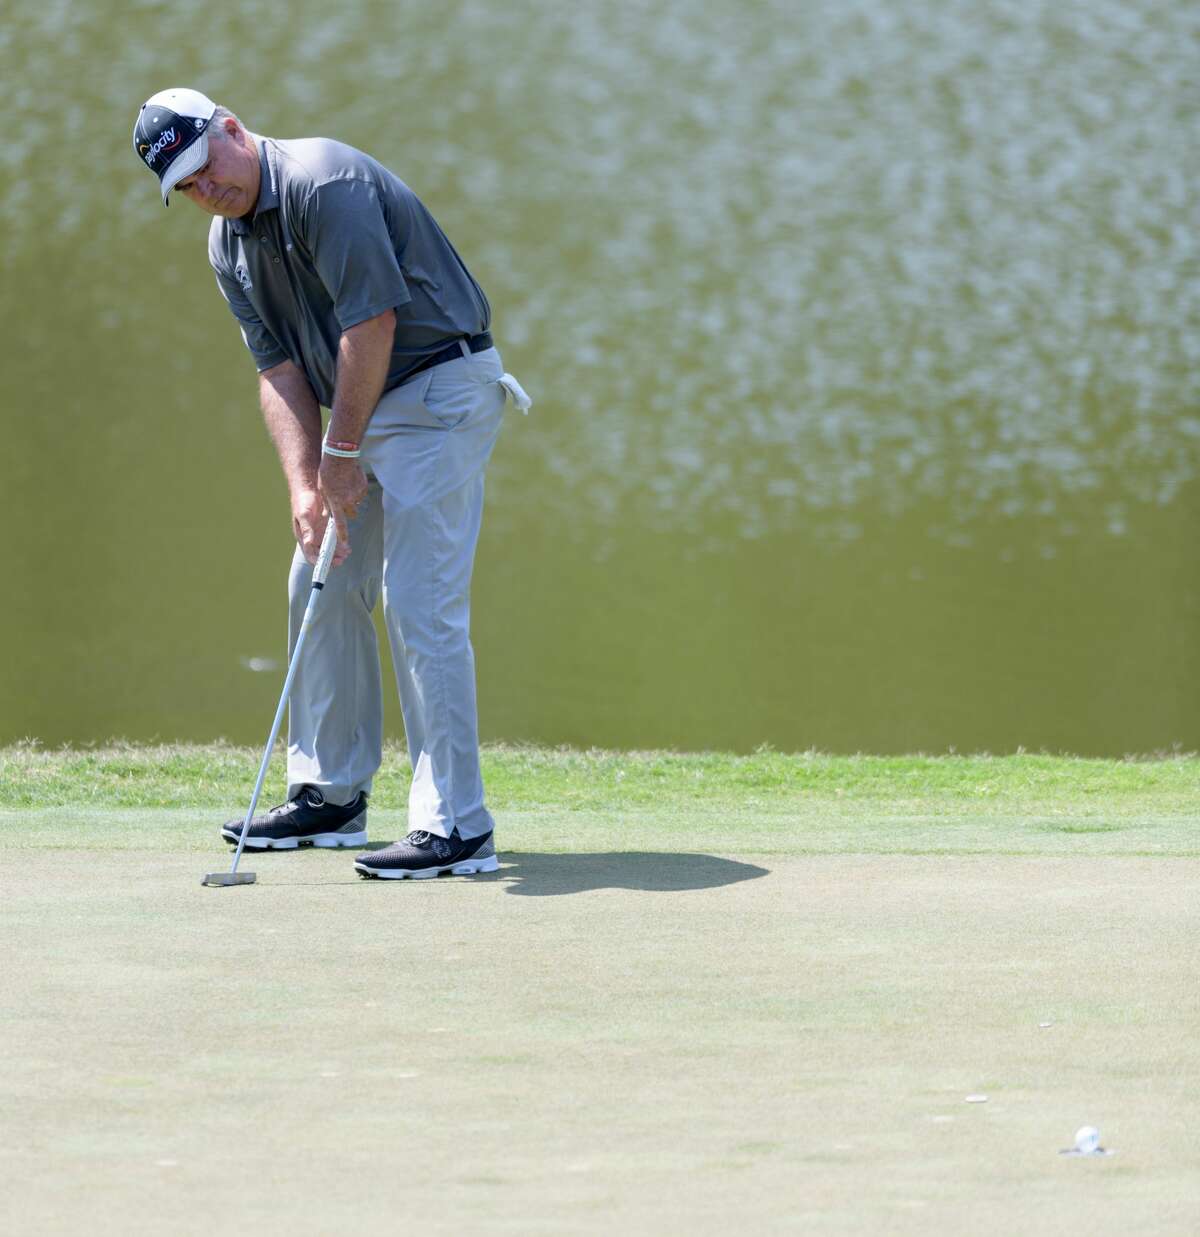 Kenny Perry sinks his putt on the 14th green during the third round of the Insperity Invitational on Sunday, May 7, 2017 at The Woodlands Country Club Tournament Course in The Woodlands Texas.